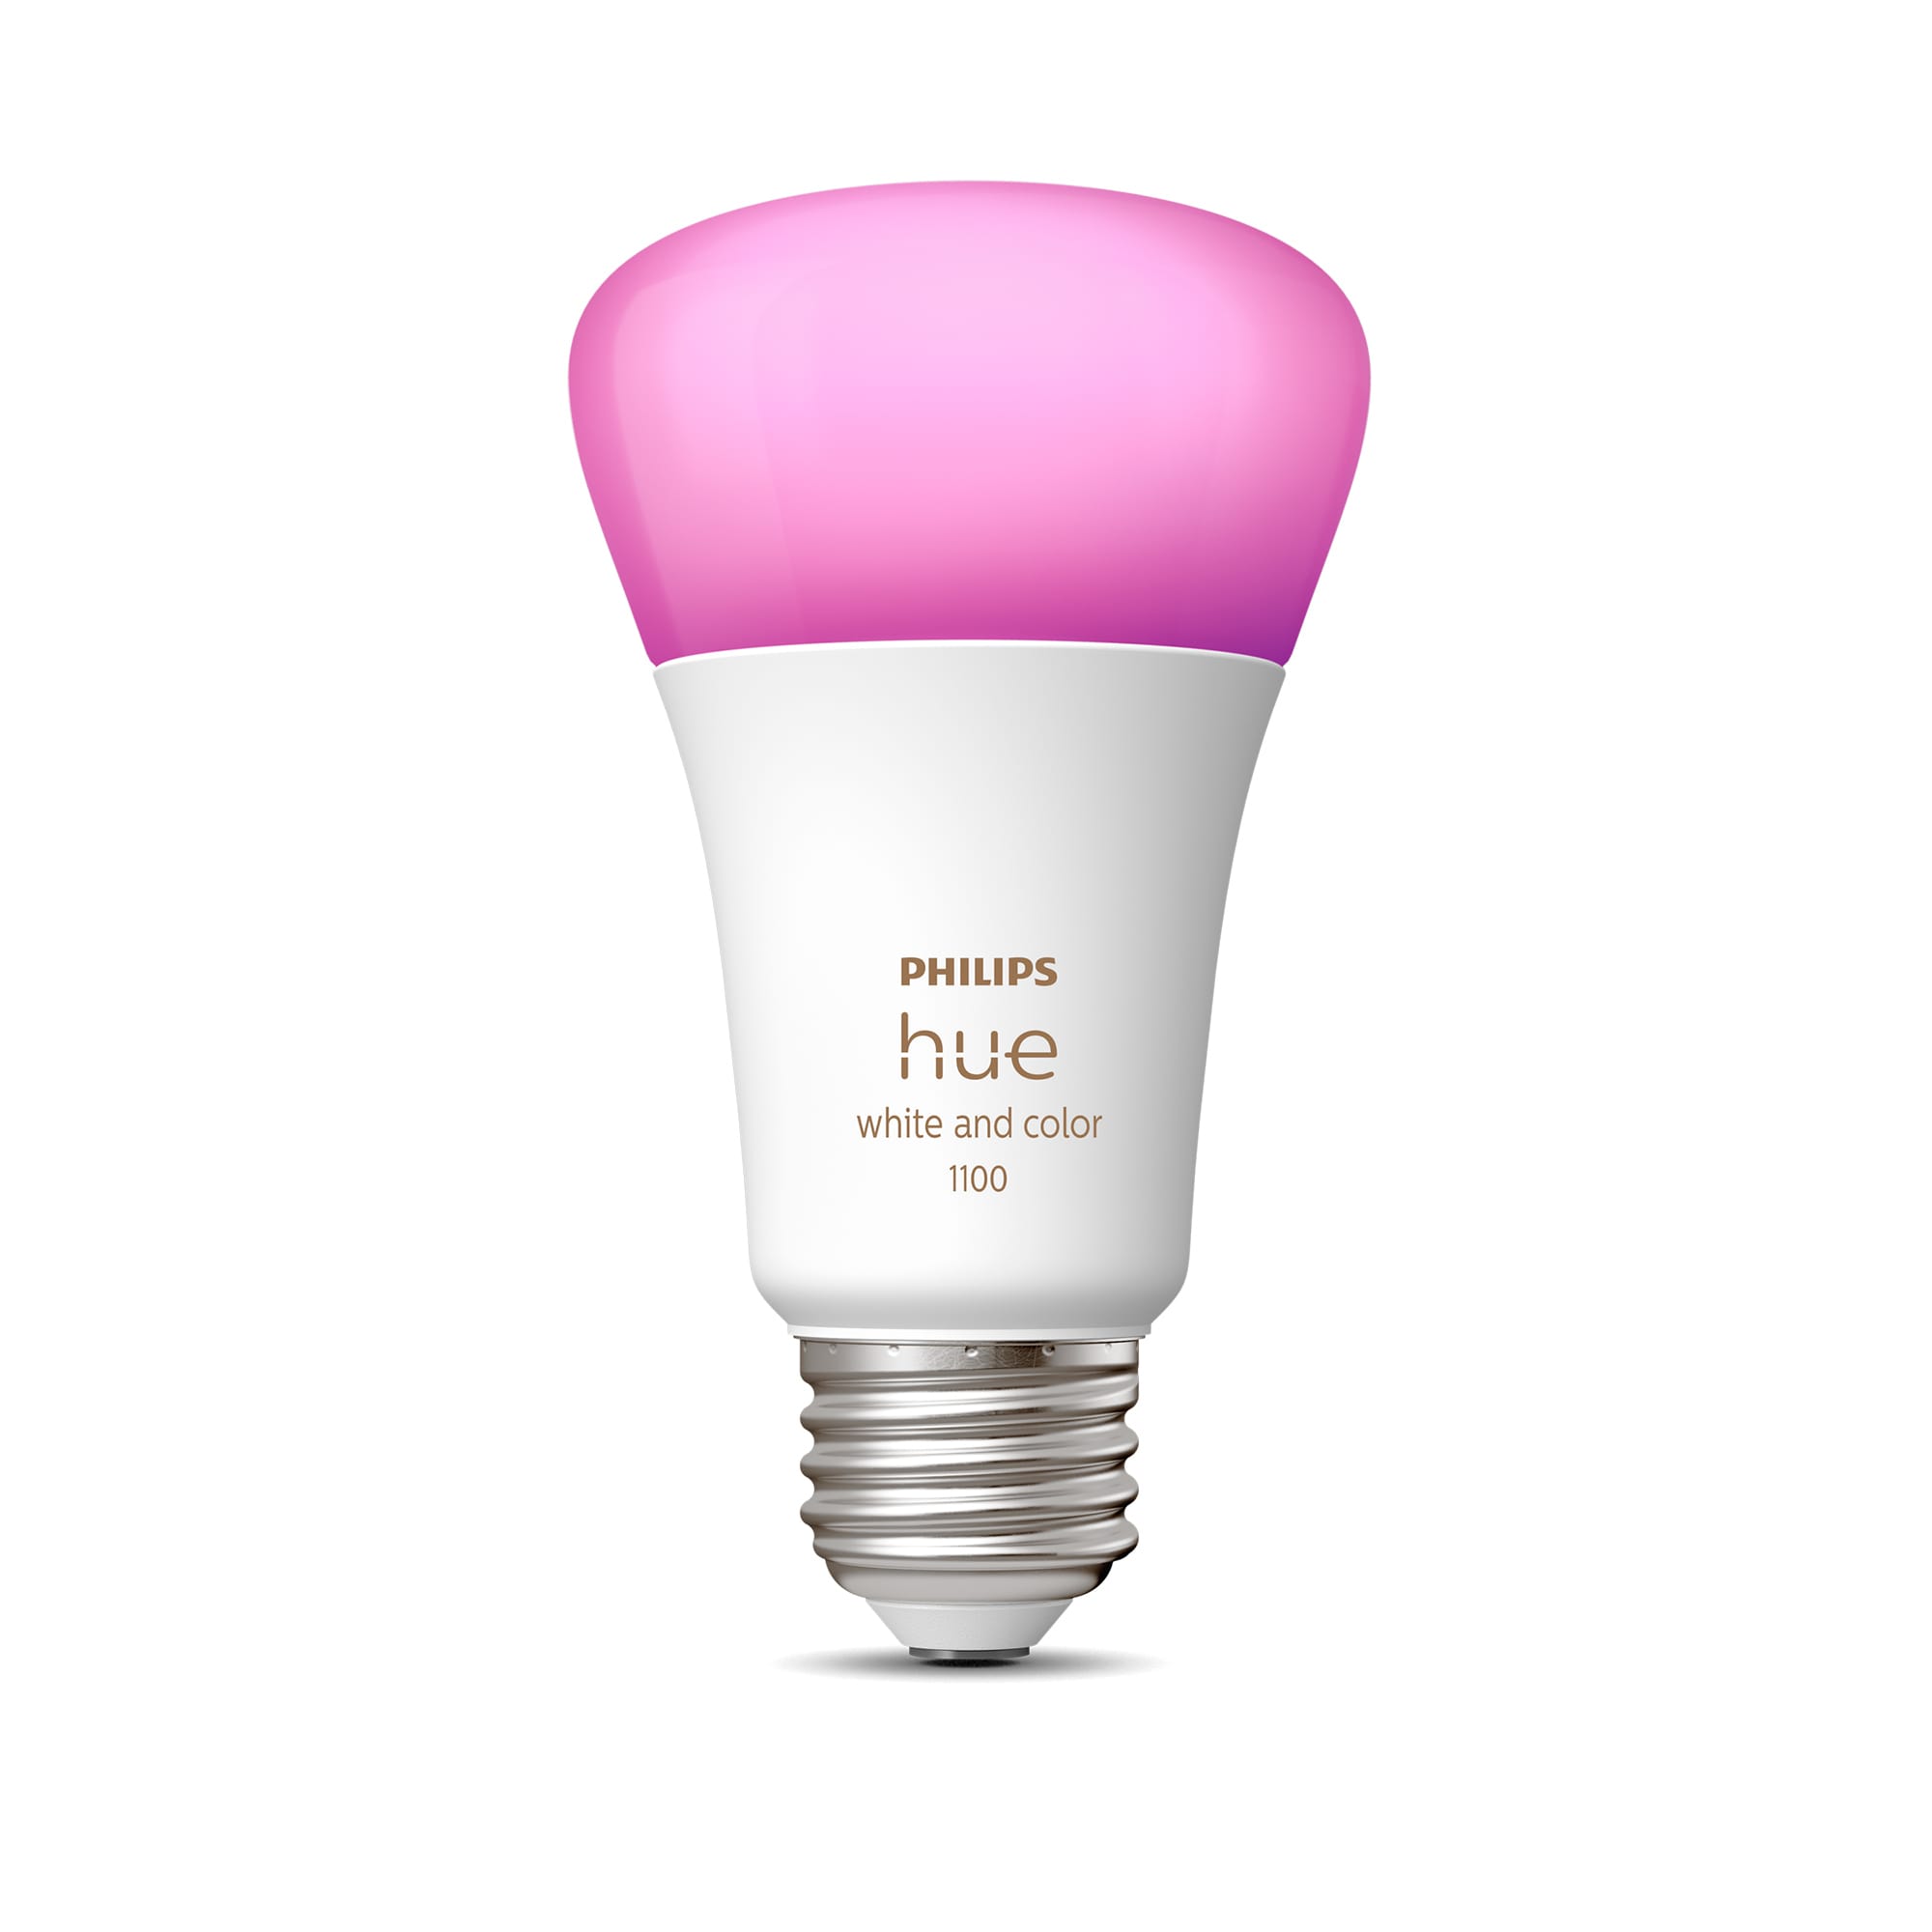 donker hebzuchtig te binden Philips General Purpose LED Light Bulbs at Lowes.com